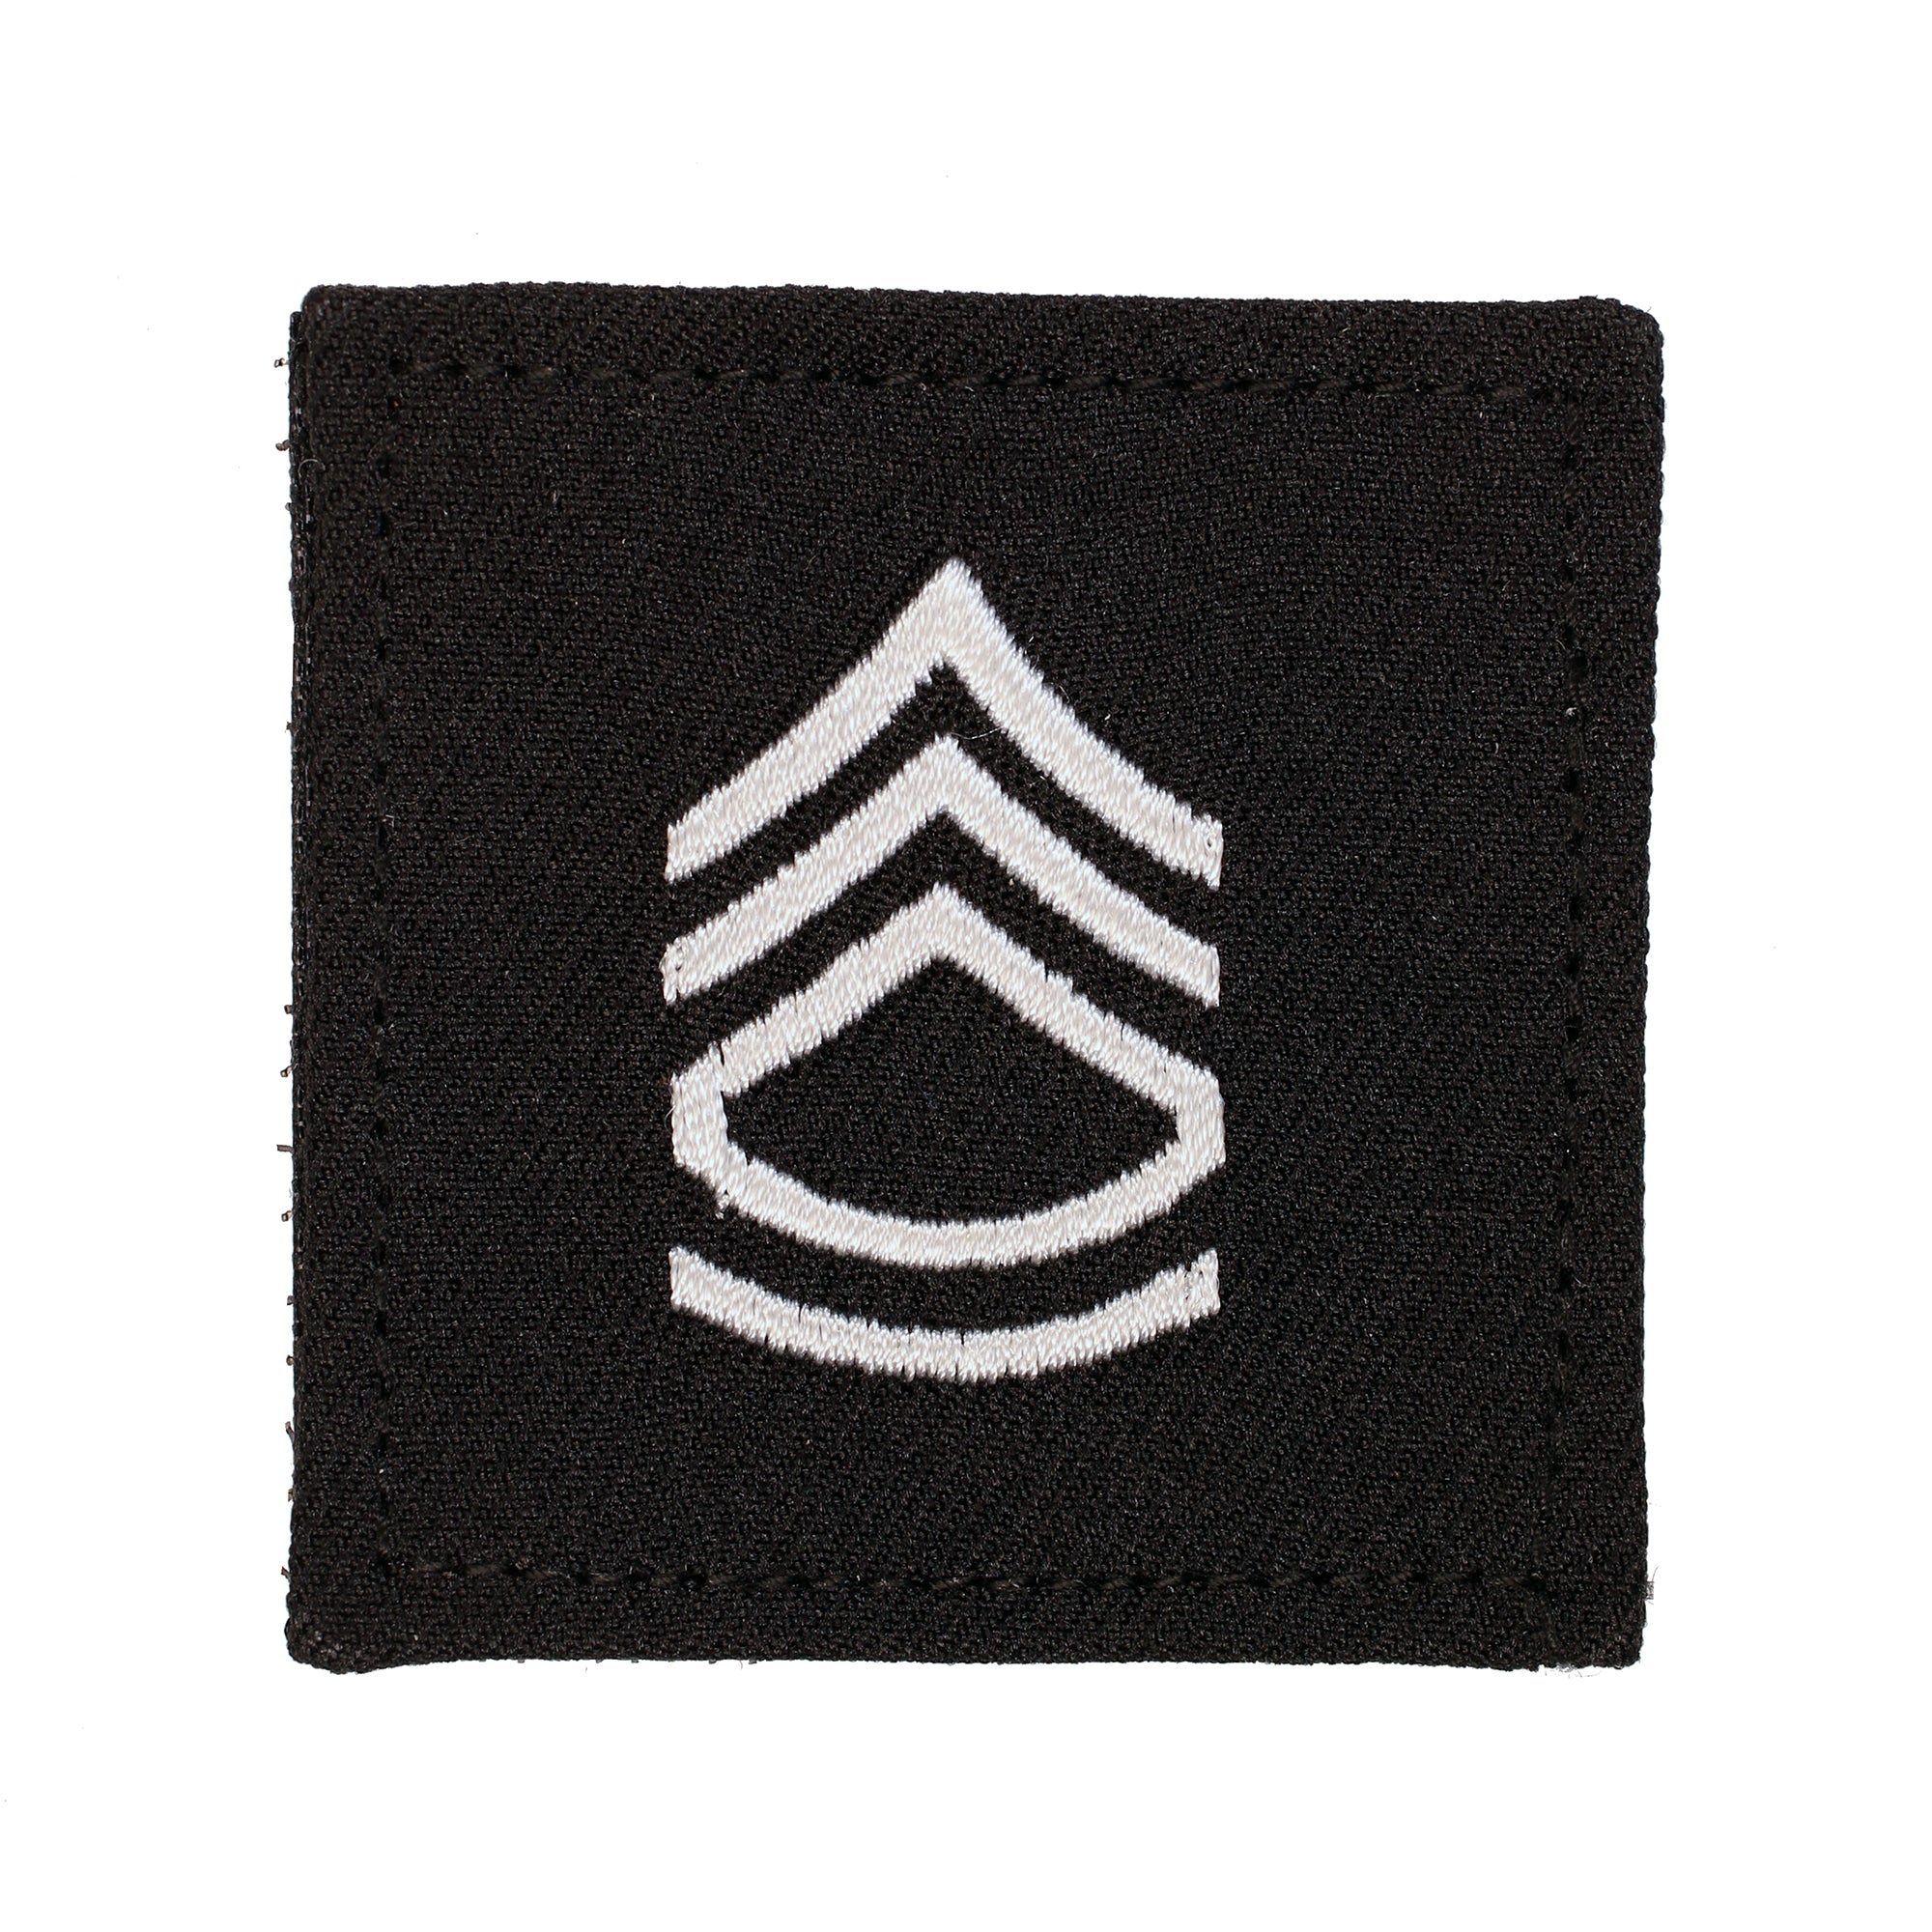 SGT 1ST CLASS 2X2 BLACK WITH HOOK FASTNER - Insignia Depot